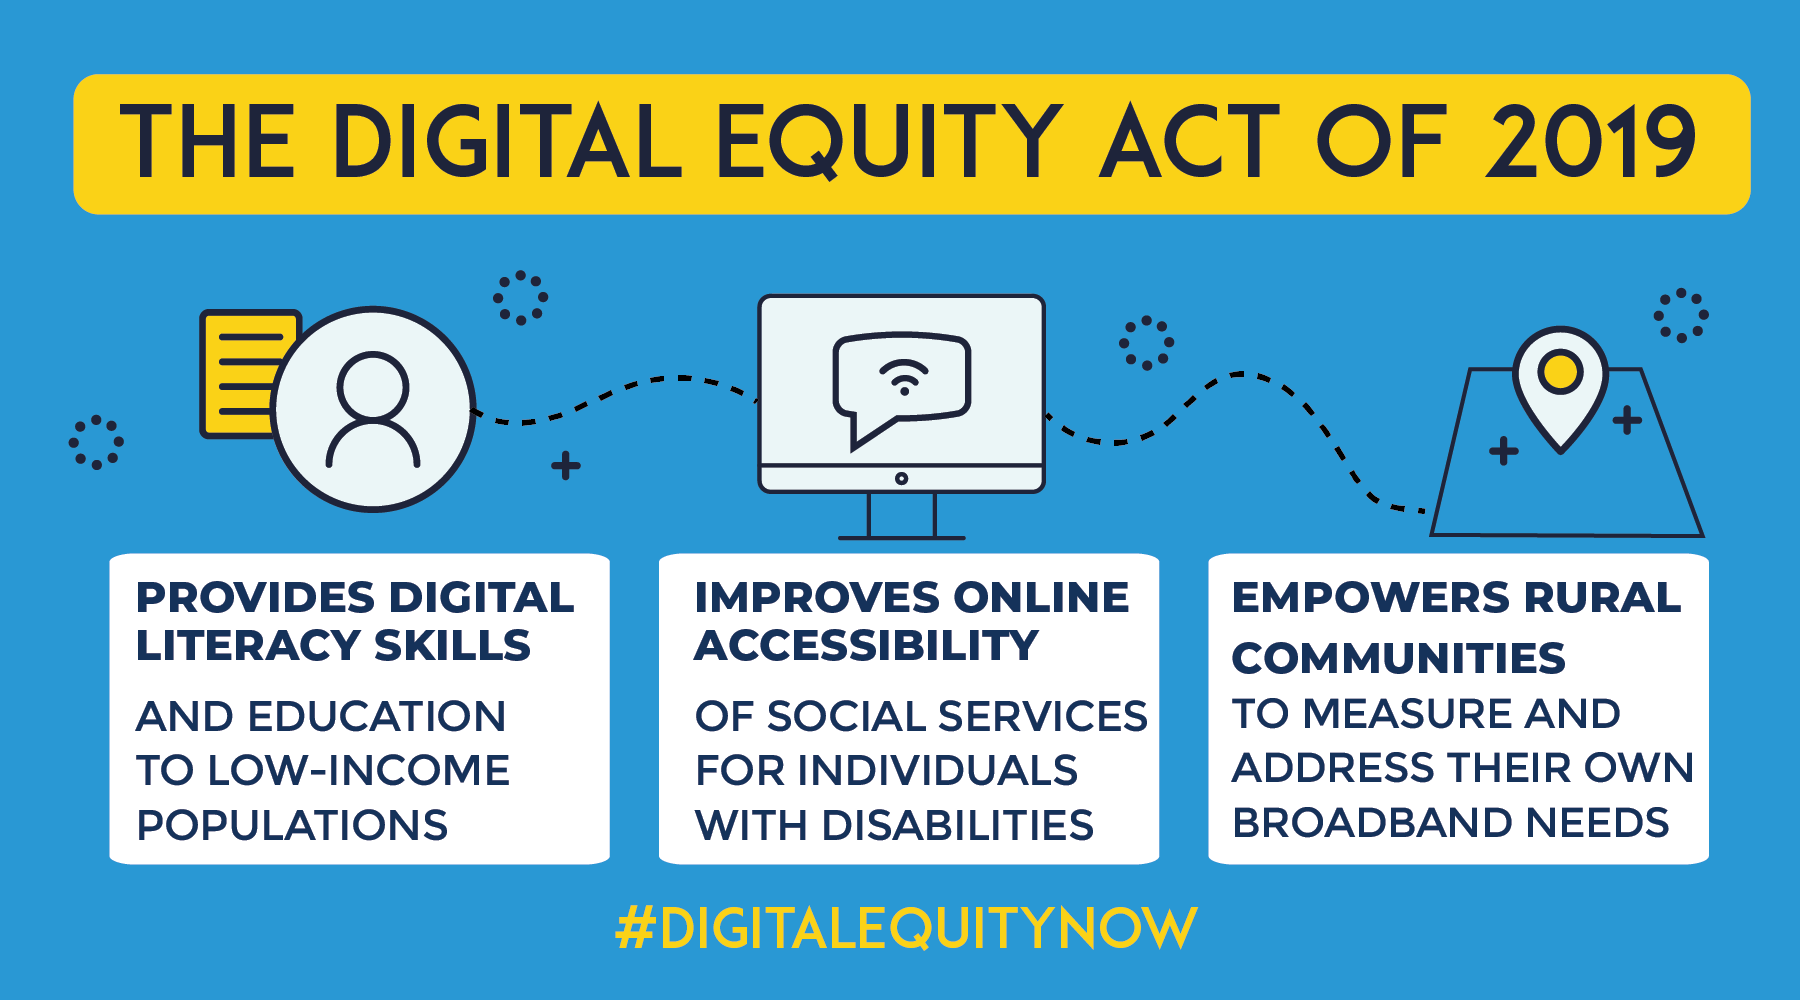 Digital Equity Act of 2019 graphic with three supportive bullet points and hashtag DigitalEquityNow